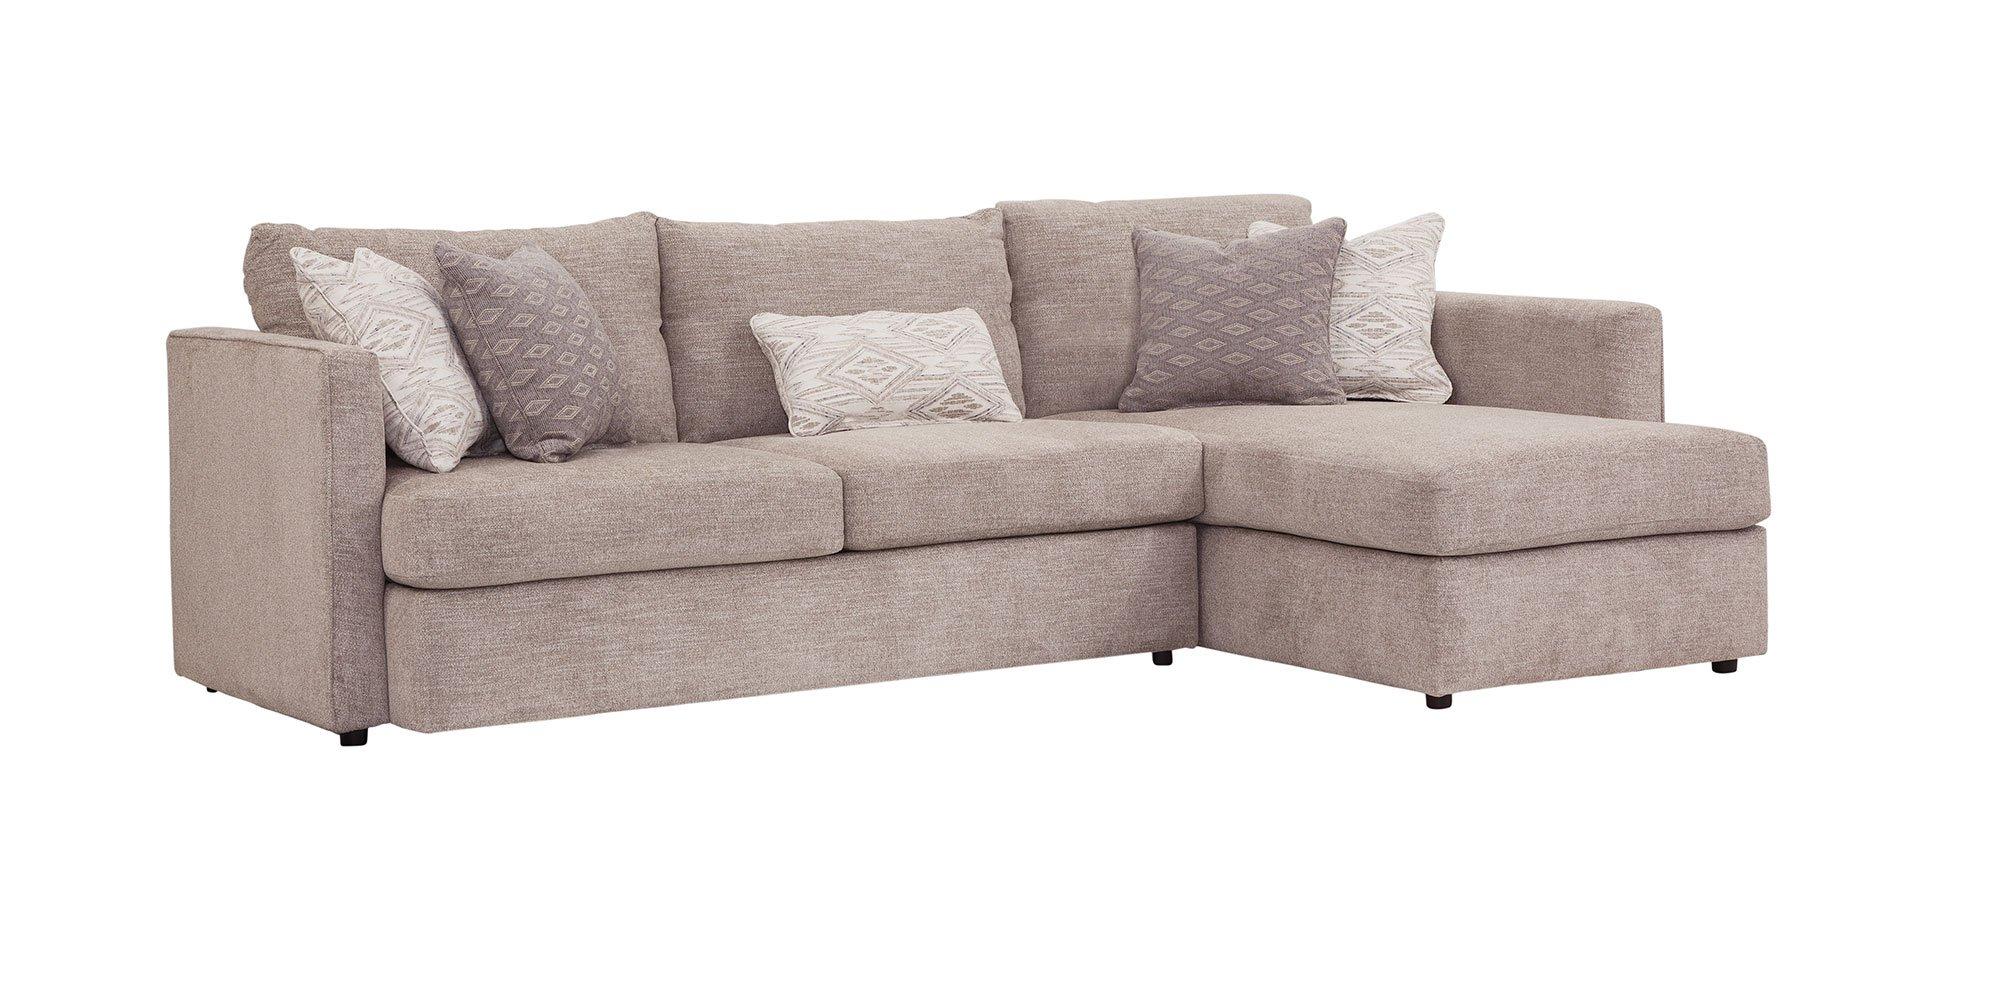 Woodhaven 2 Piece Beverly Living Room Collection